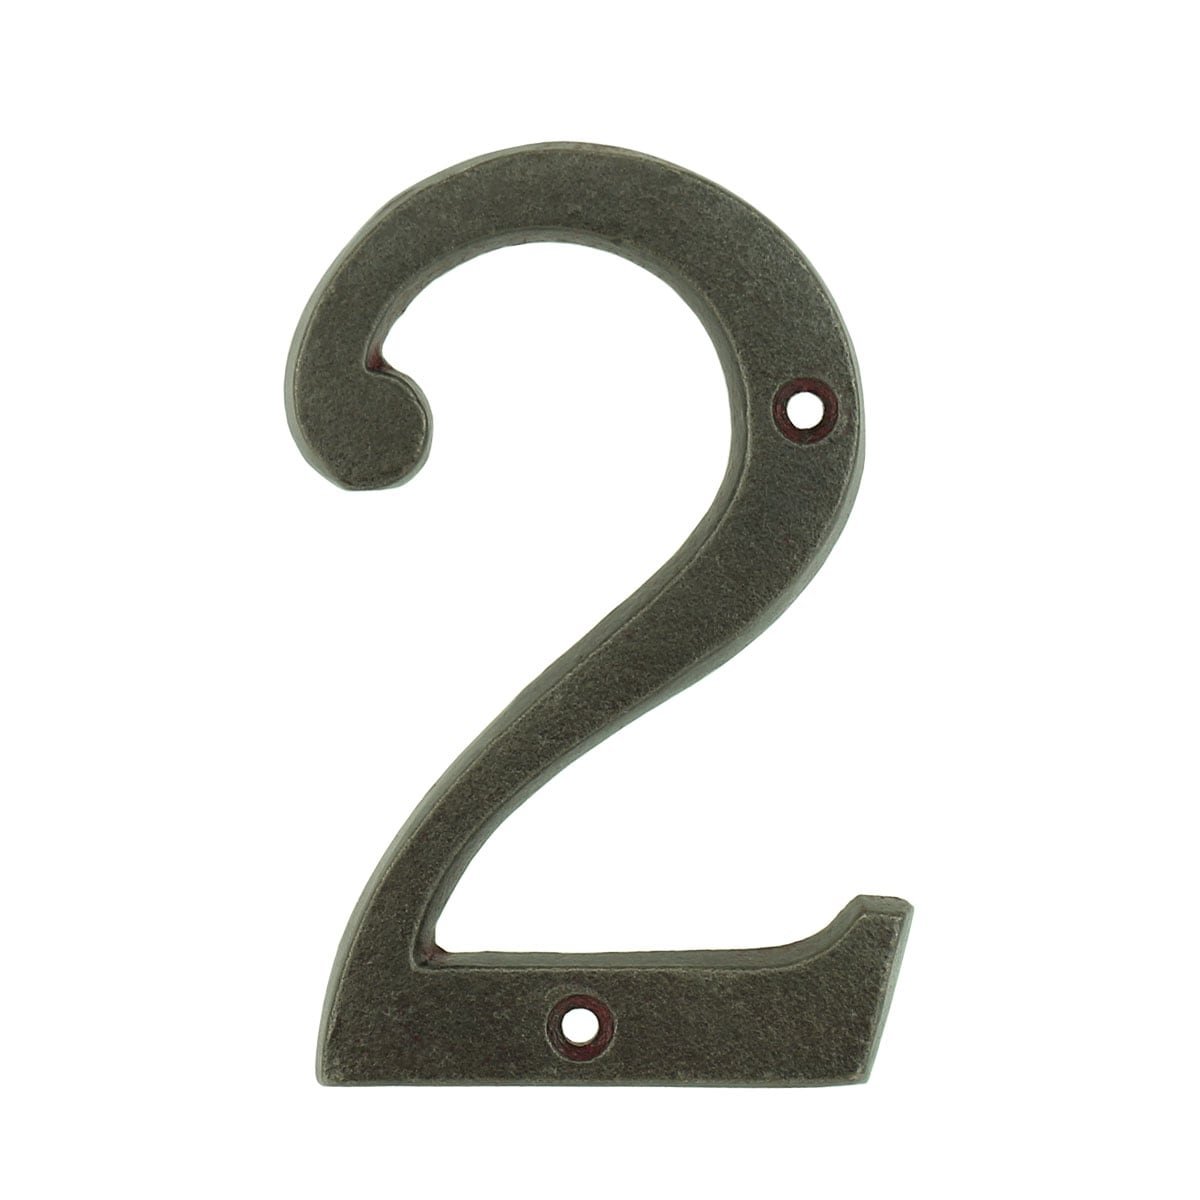 House number 2 two classic metal - 98 mm